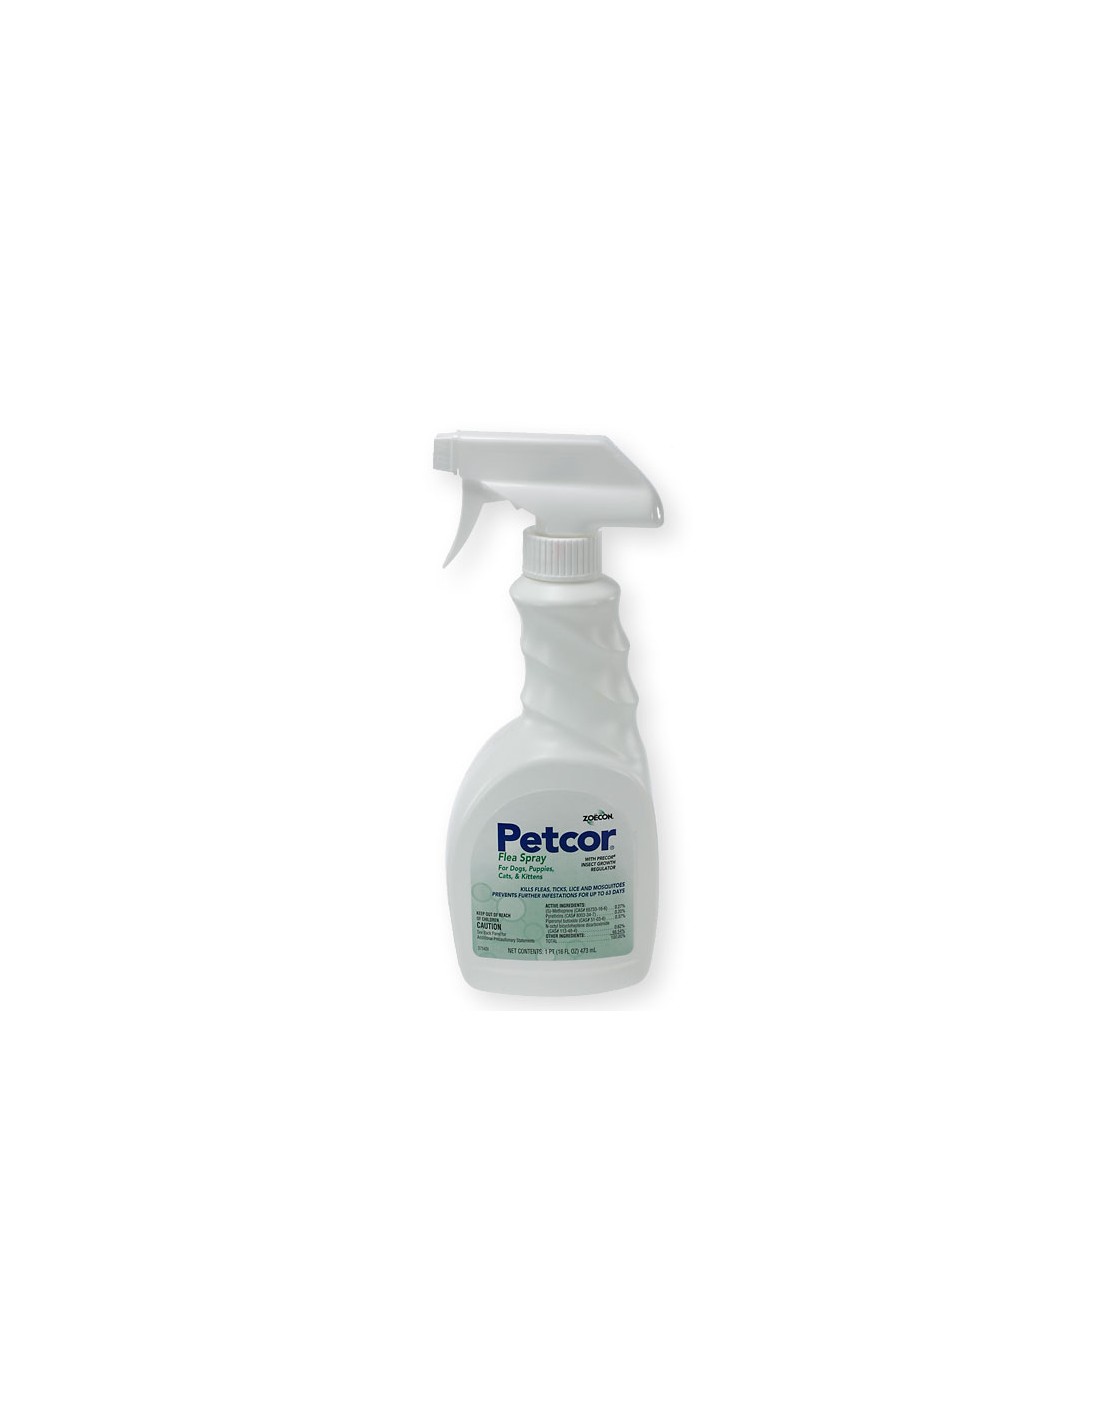 can I use petcor to spray carpets and furniture or only on pets?